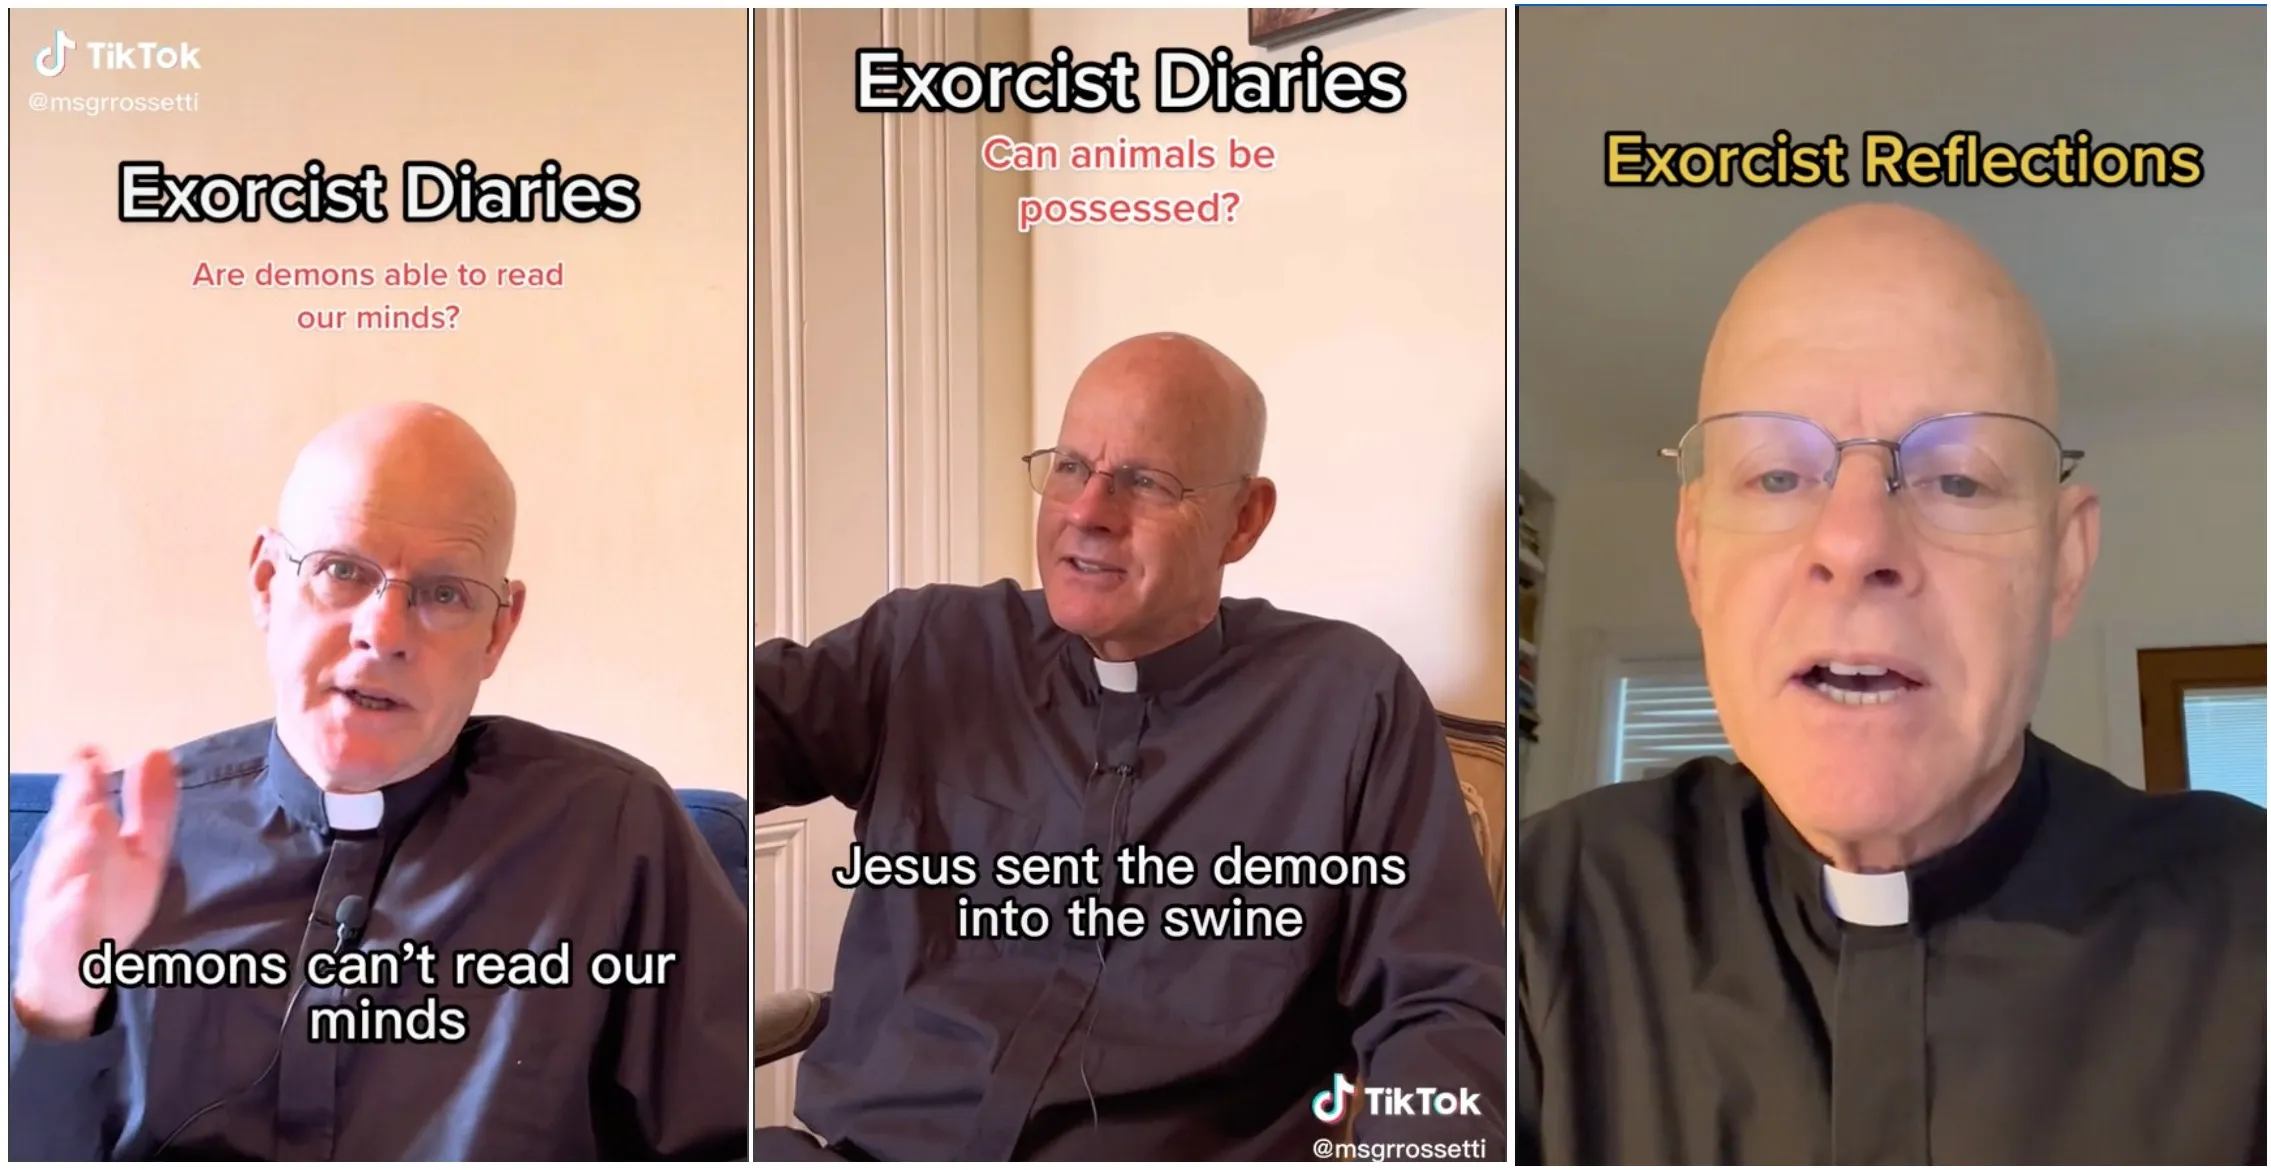 Monsignor Stephen Rossetti has already gained thousands of followers on social media after sharing the wisdom he has gained as an exorcist on online platforms.?w=200&h=150